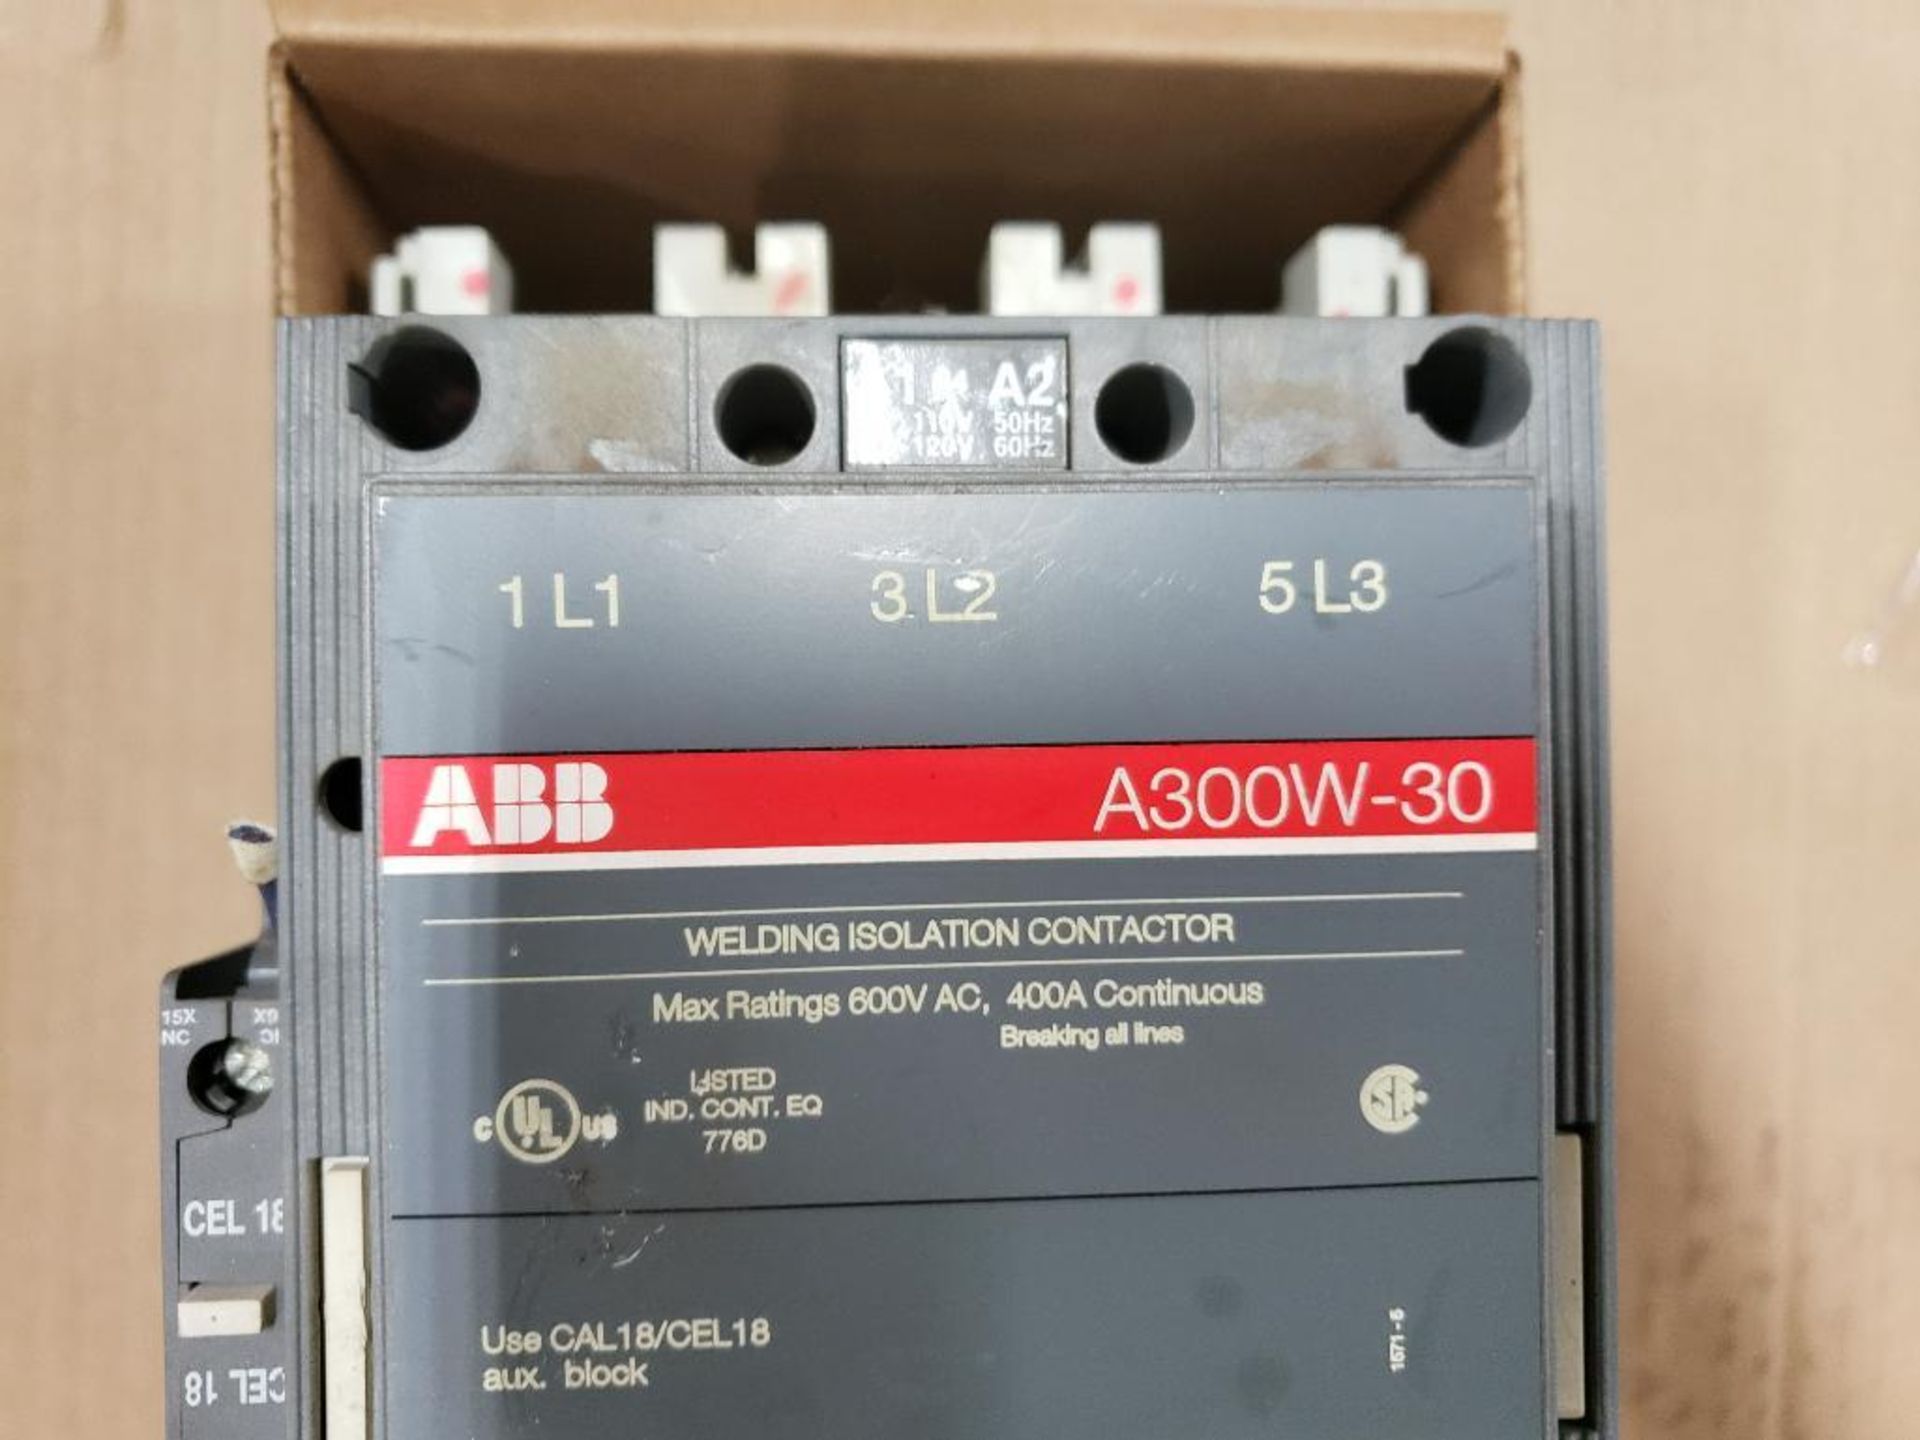 ABB A300W-30 welding isolation contactor. - Image 3 of 4